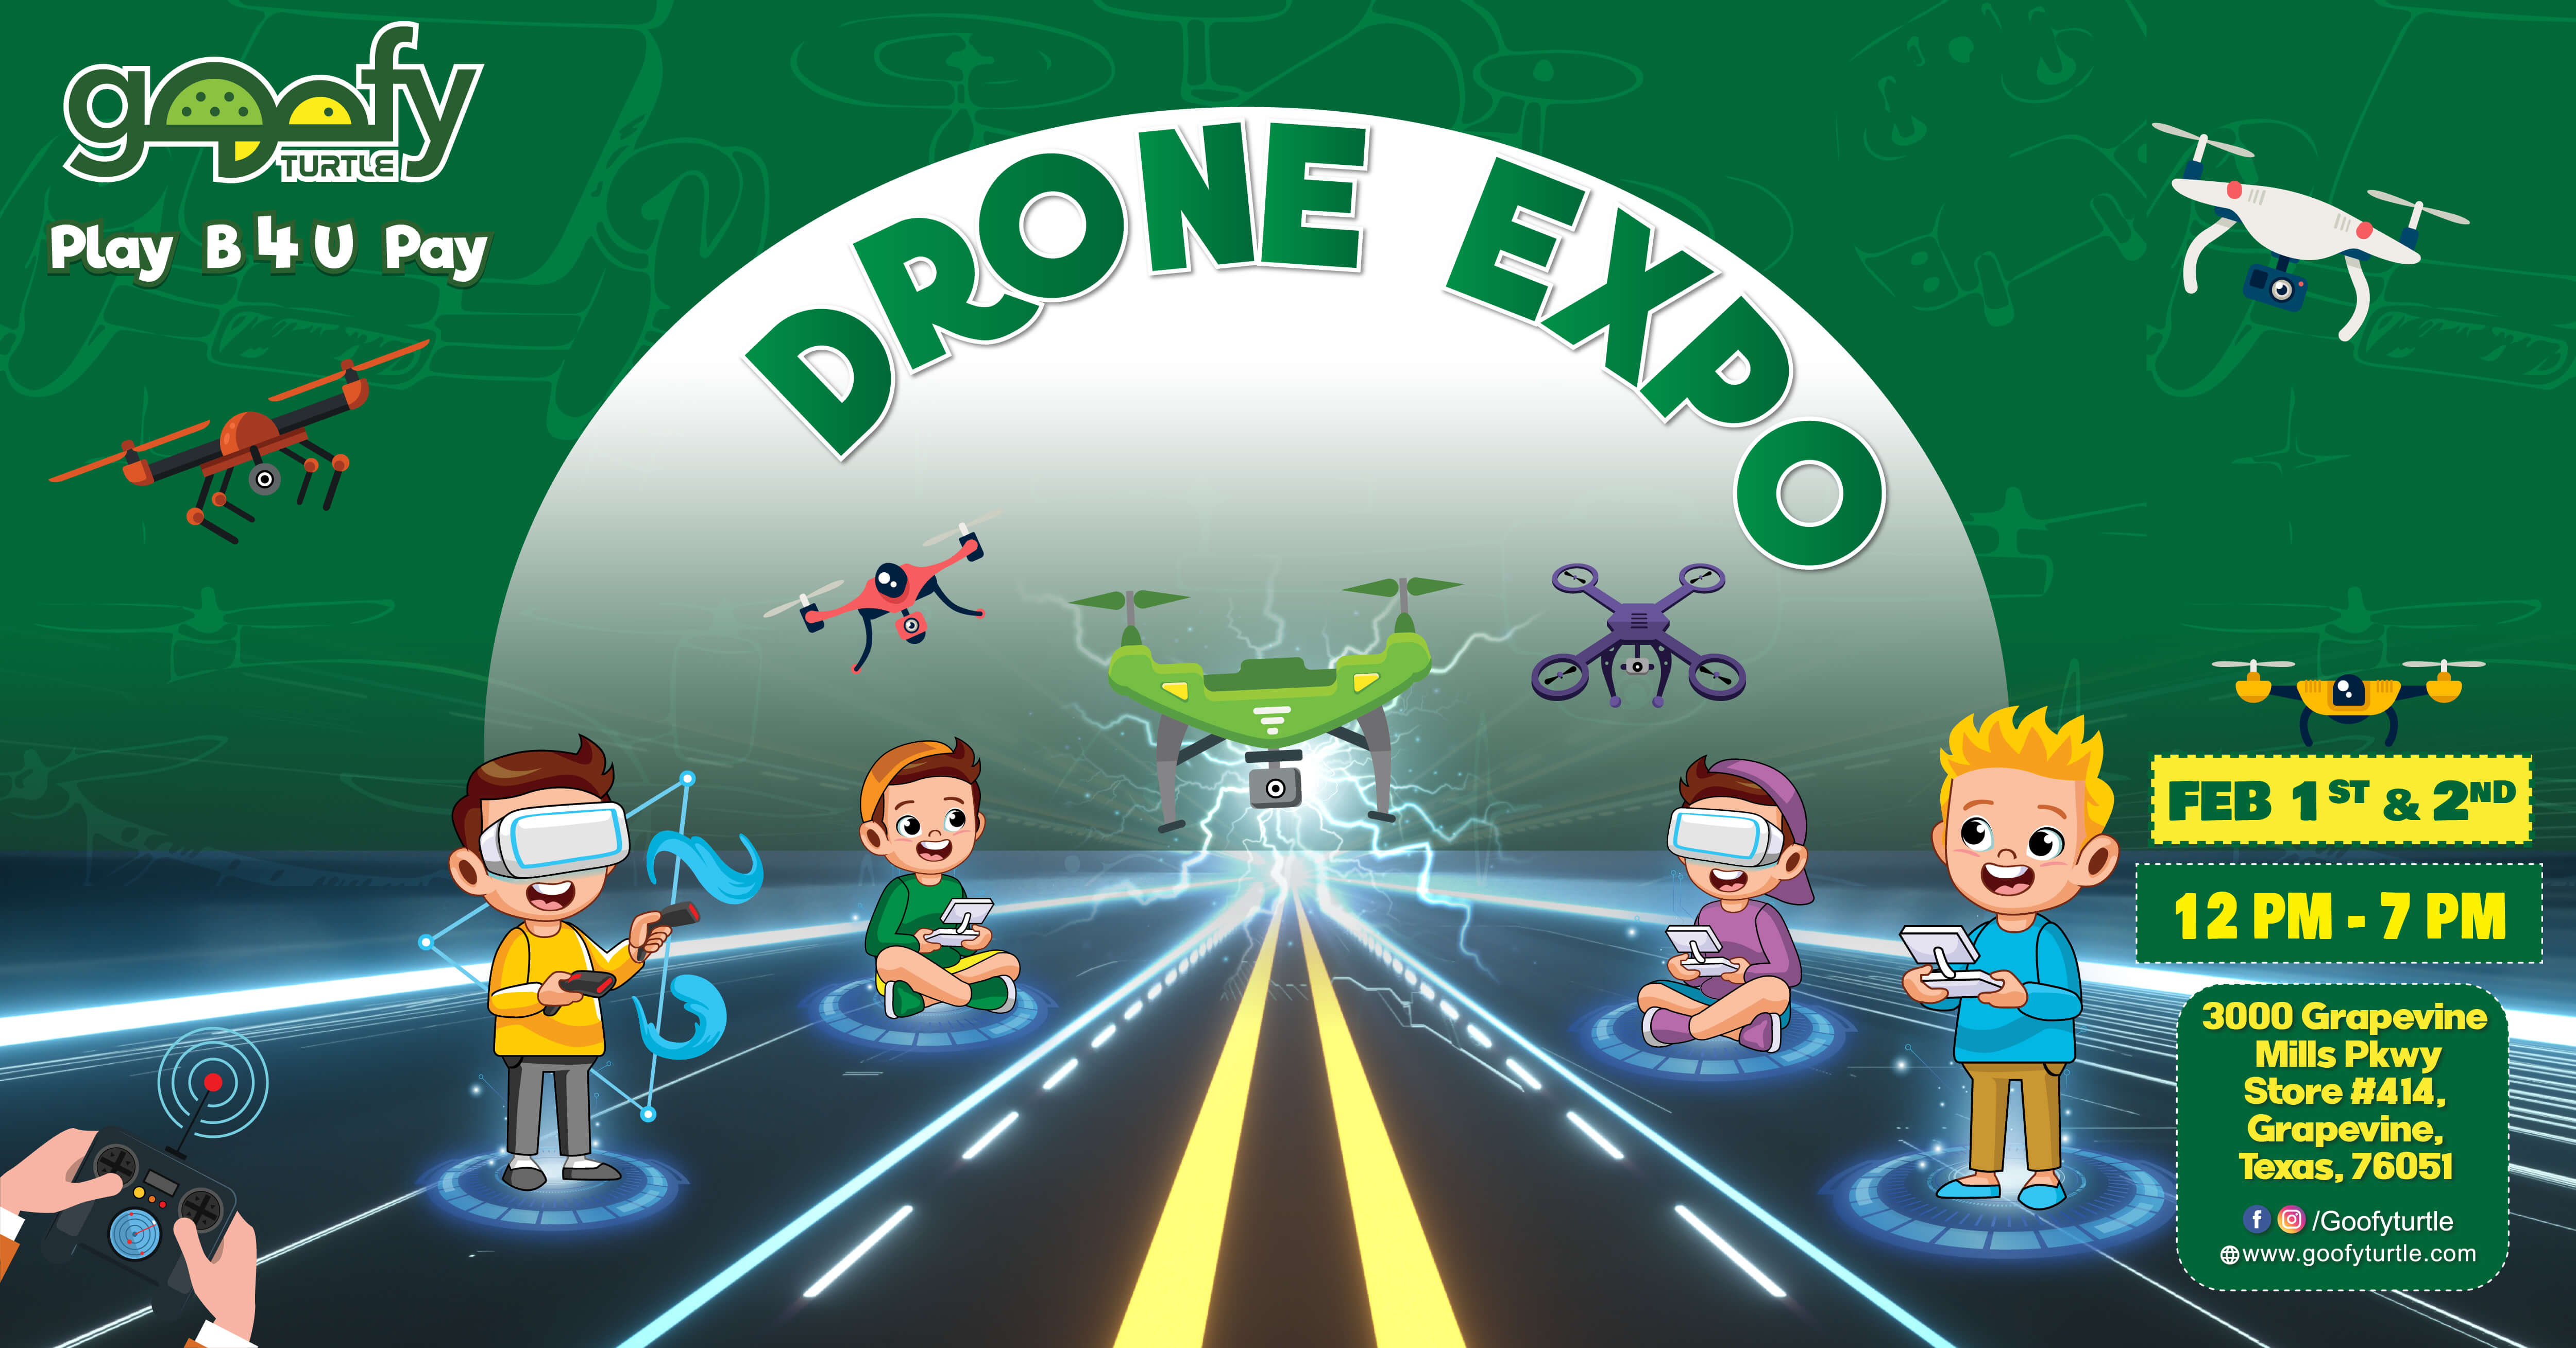 Drone expo – Experience As Many Drones As You Can, Dallas, Texas, United States